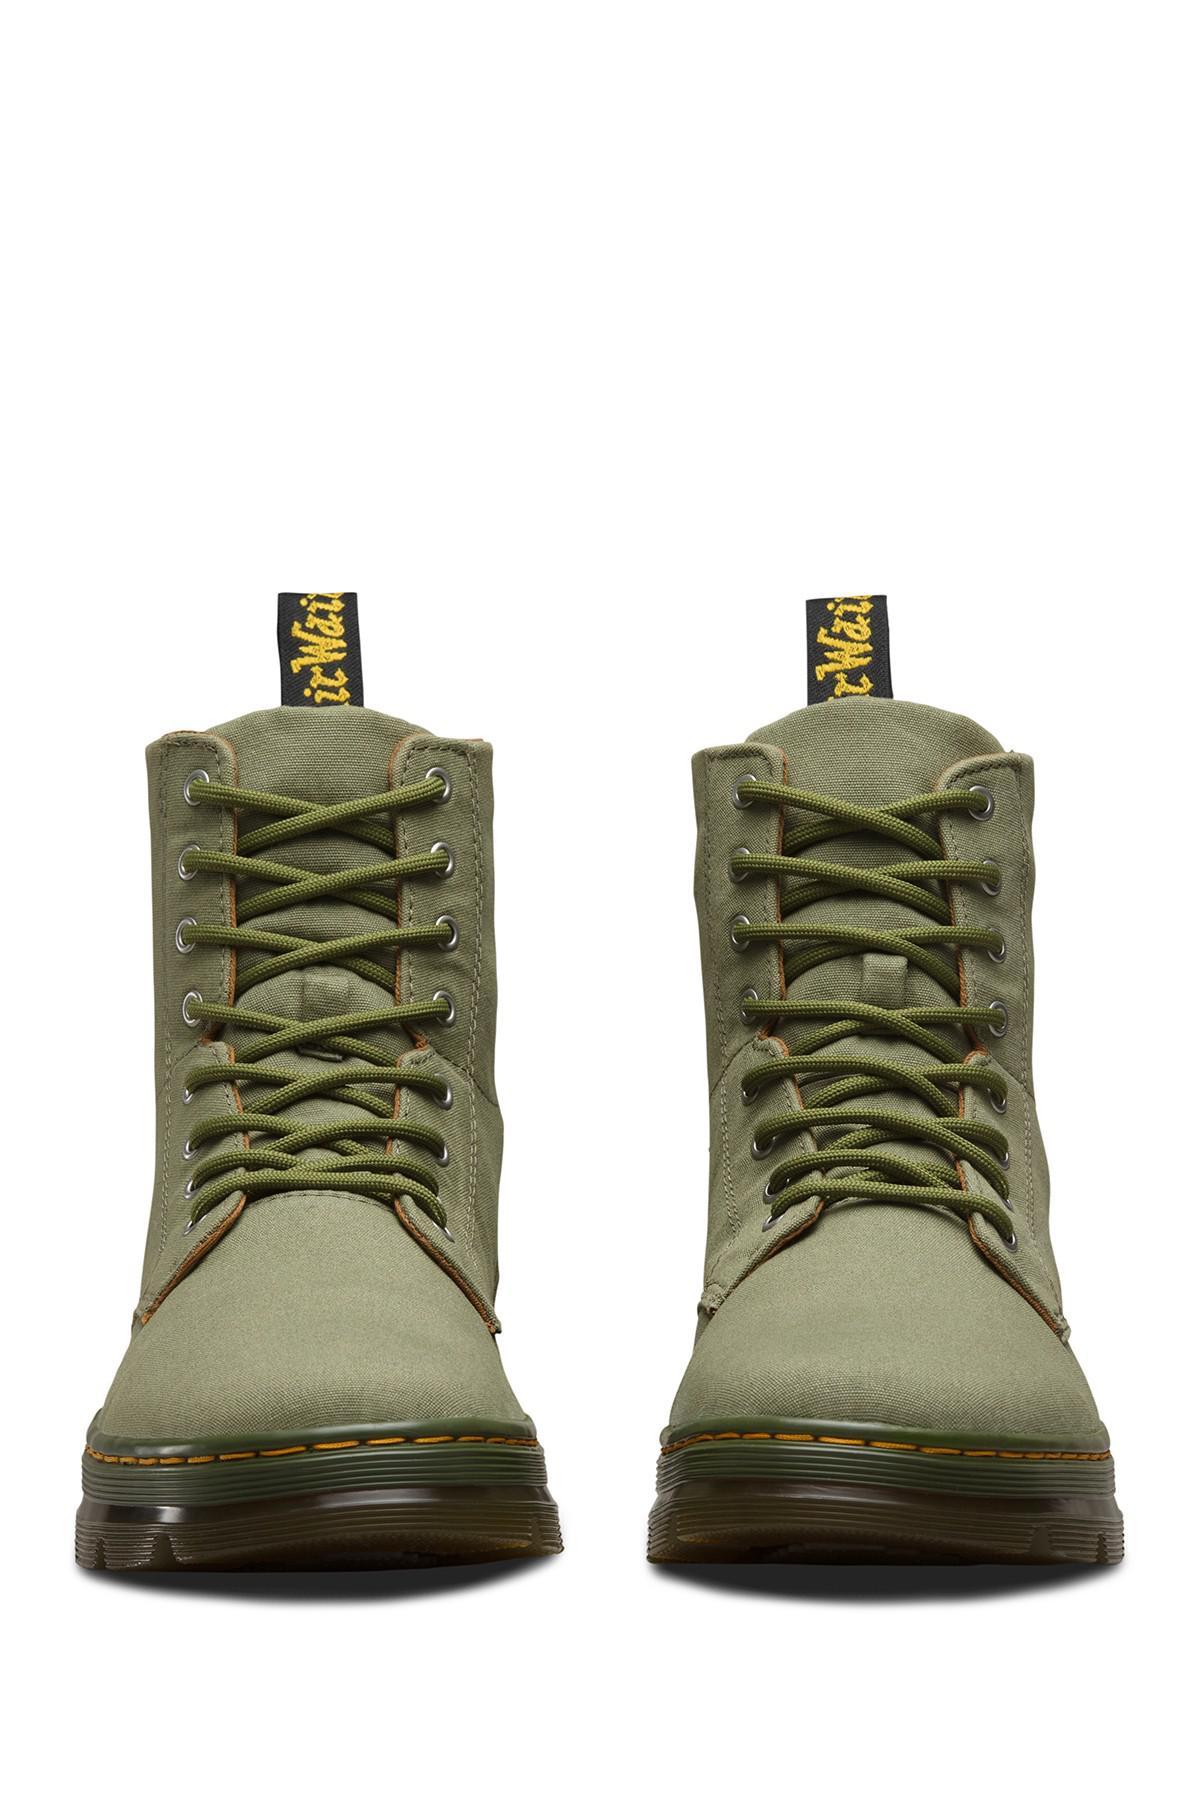 Dr. Martens Combs Mid Khaki Boot in Green for Men - Lyst